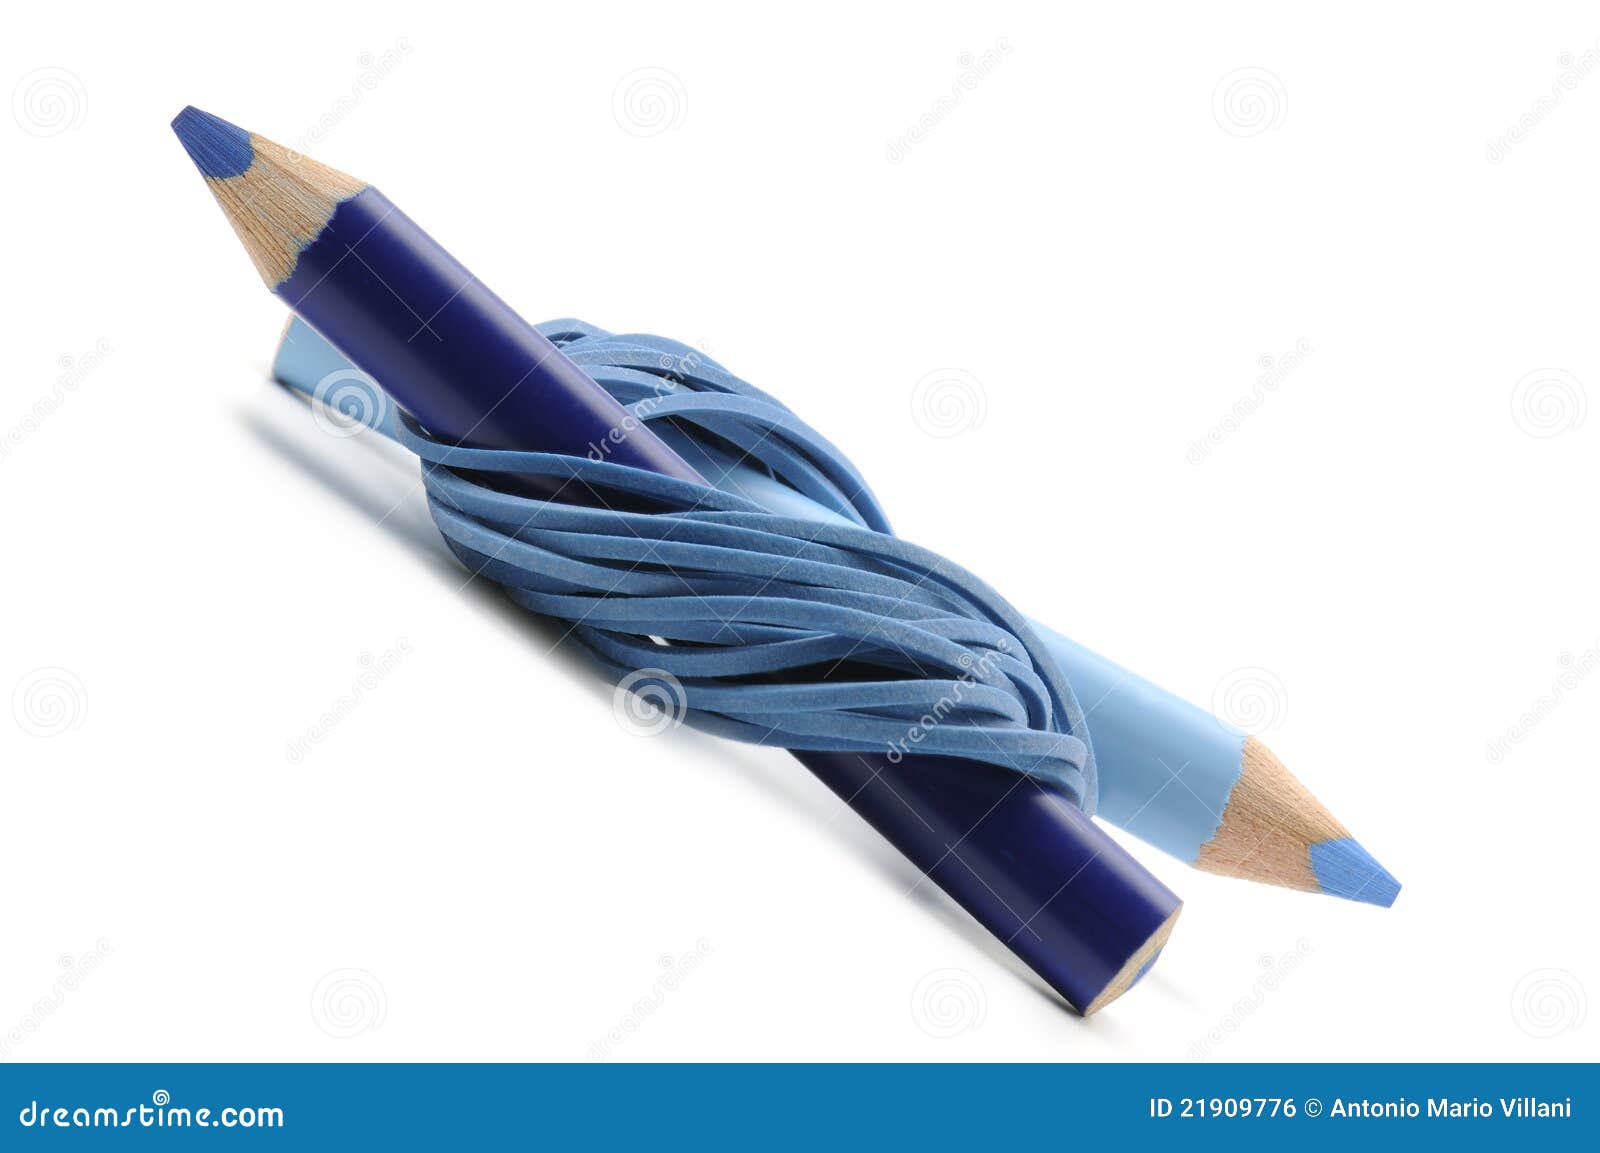 Pencil And Rubber Band Royalty Free Stock Image - Image: 21909776